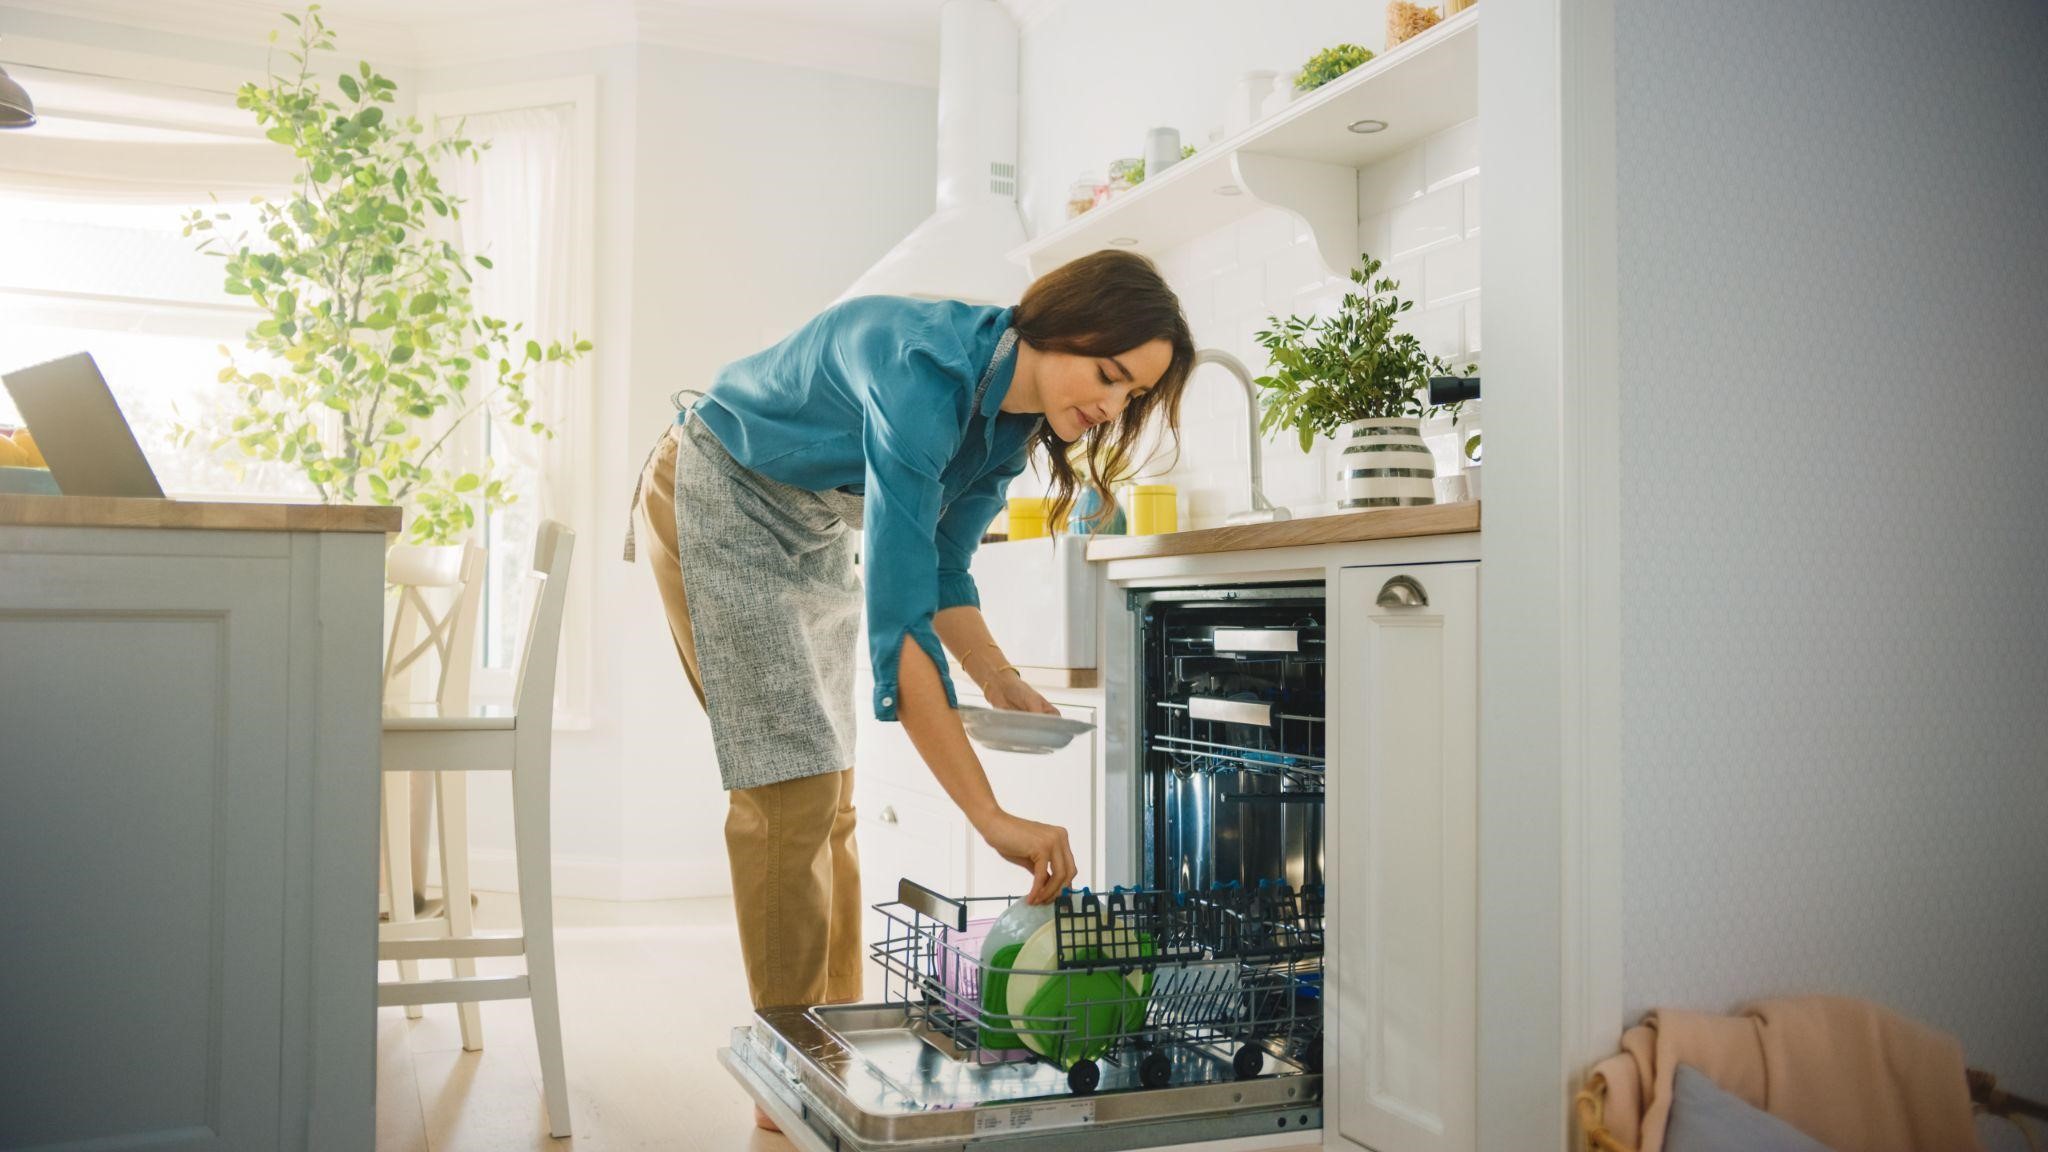 8 Things You Should Not Place in a Dishwasher